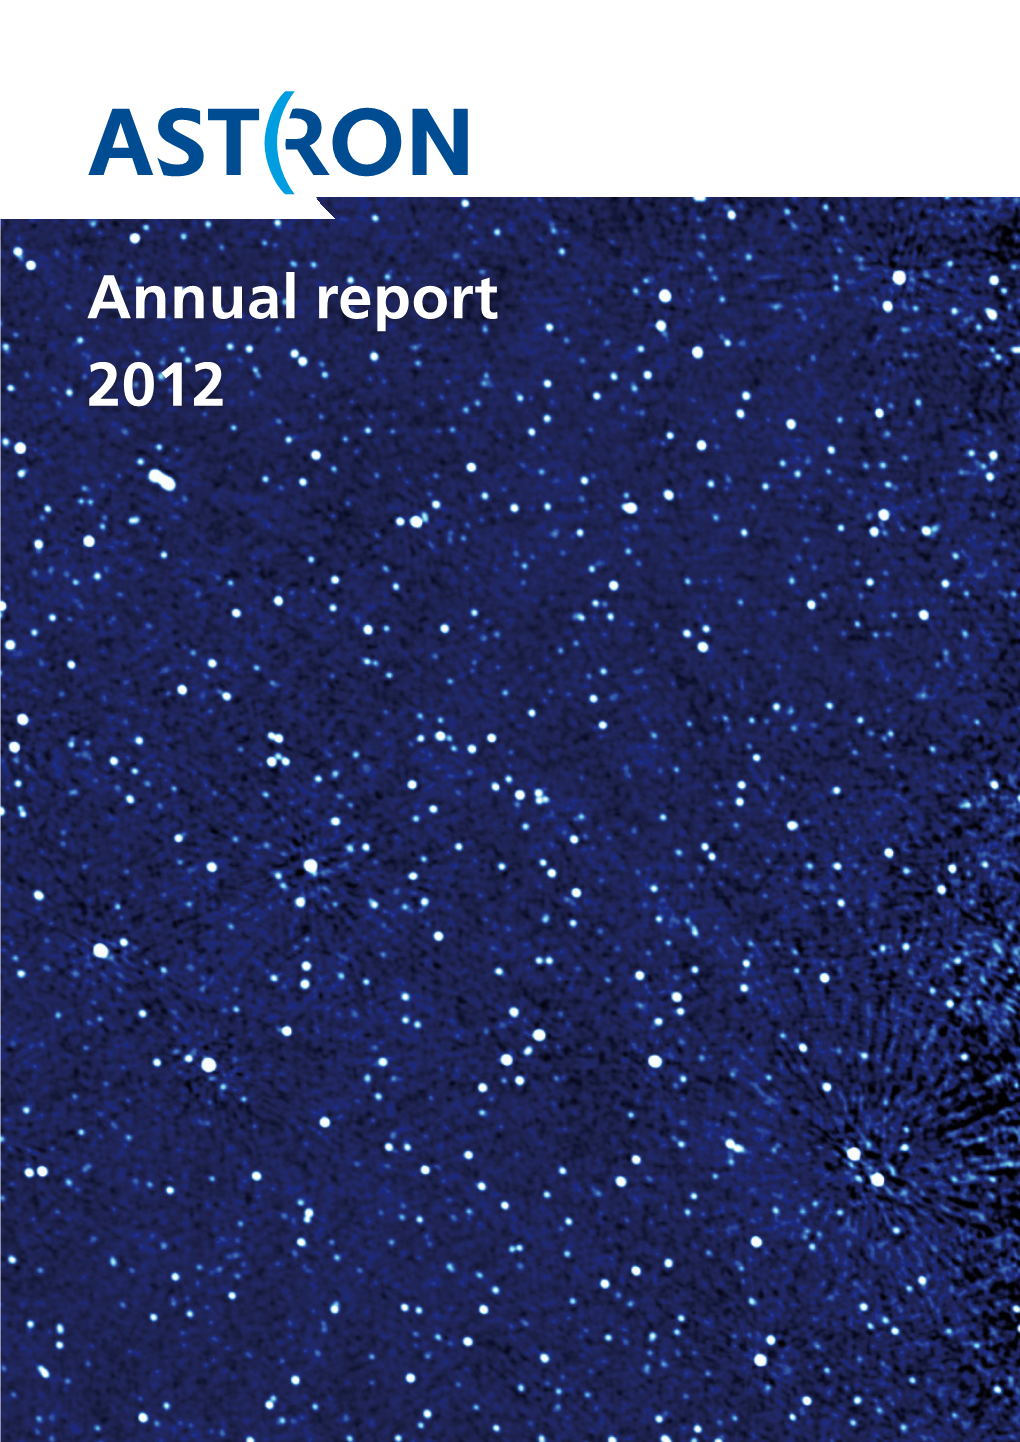 Annual Report 2012 Facts and Figures of 2012